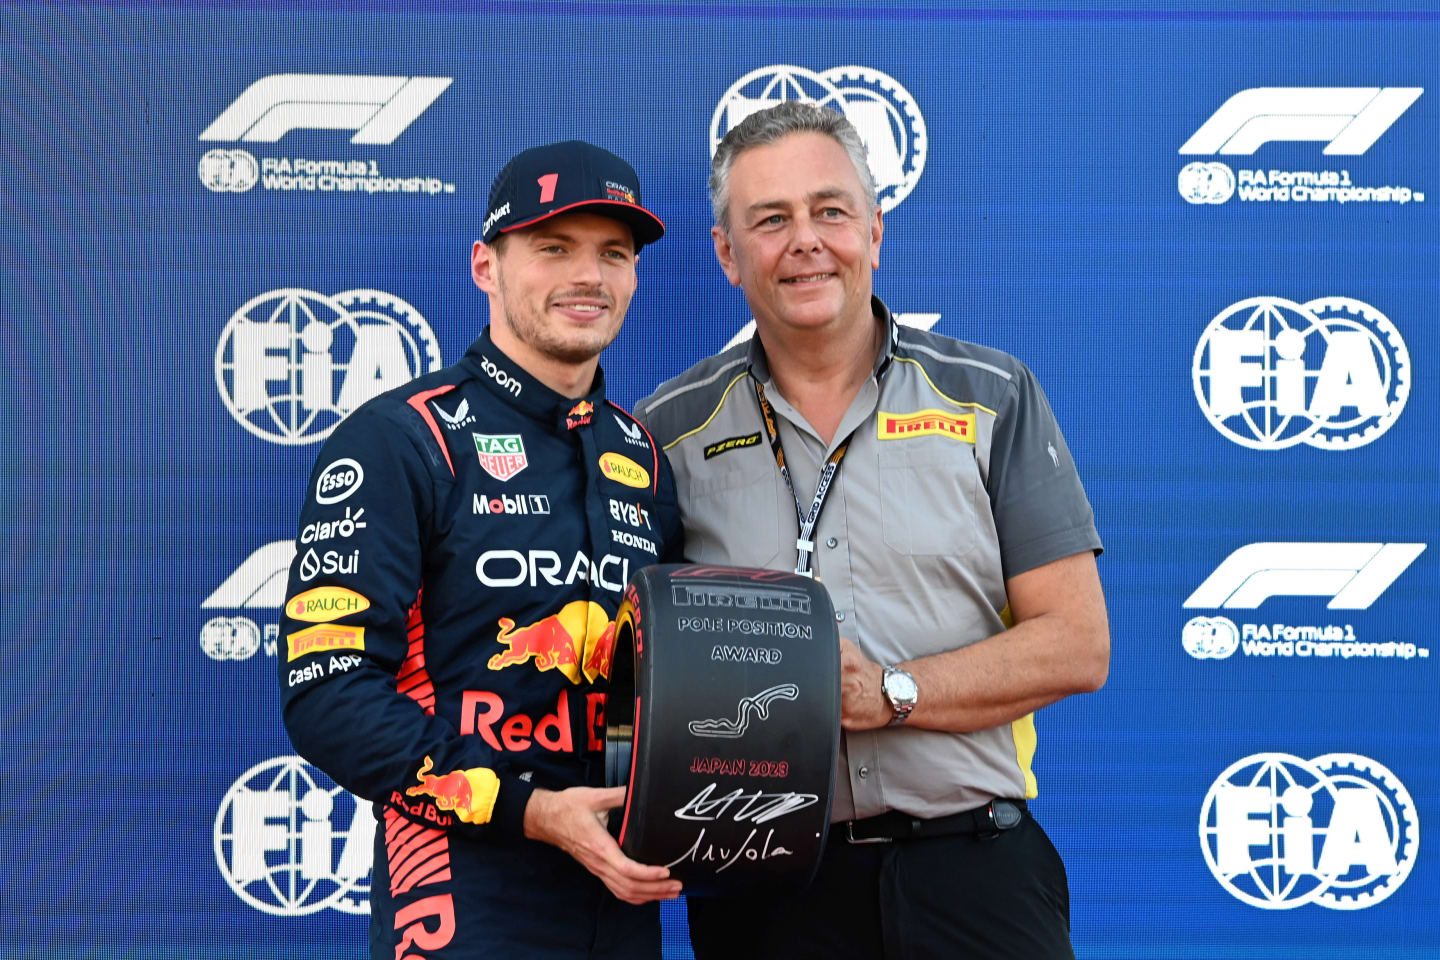 SUZUKA, JAPAN - SEPTEMBER 23: Pole man Max Verstappen, Red Bull Racing, receives his Pirelli Pole Position Award from Mario Isola, Racing Manager, Pirelli Motorsport during the Japanese GP at Suzuka on Saturday September 23, 2023 in Suzuka, Japan. (Photo by Mark Sutton / LAT Images)